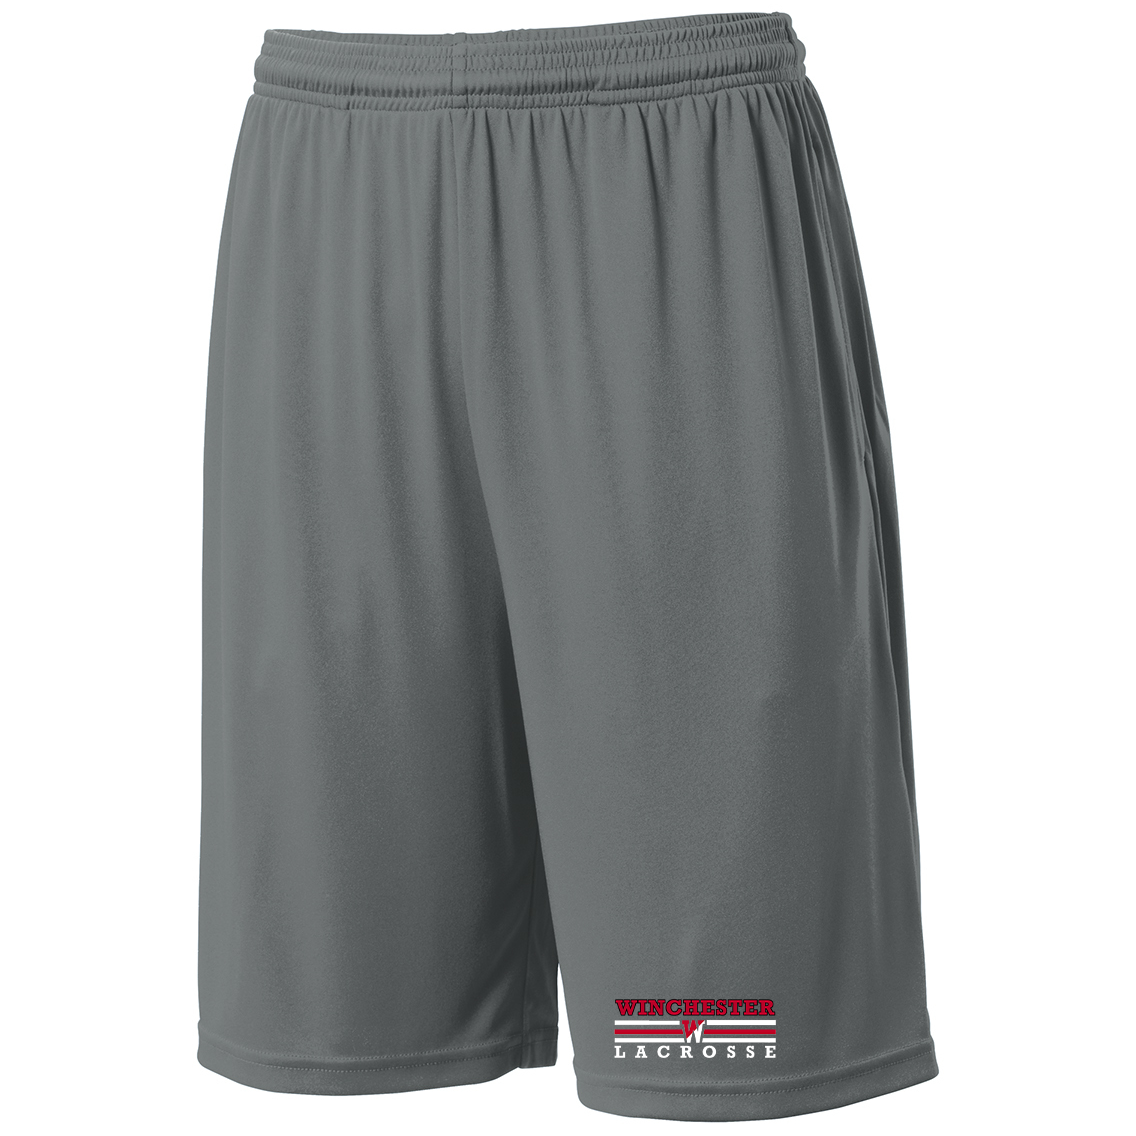 Winchester Lacrosse Shorts